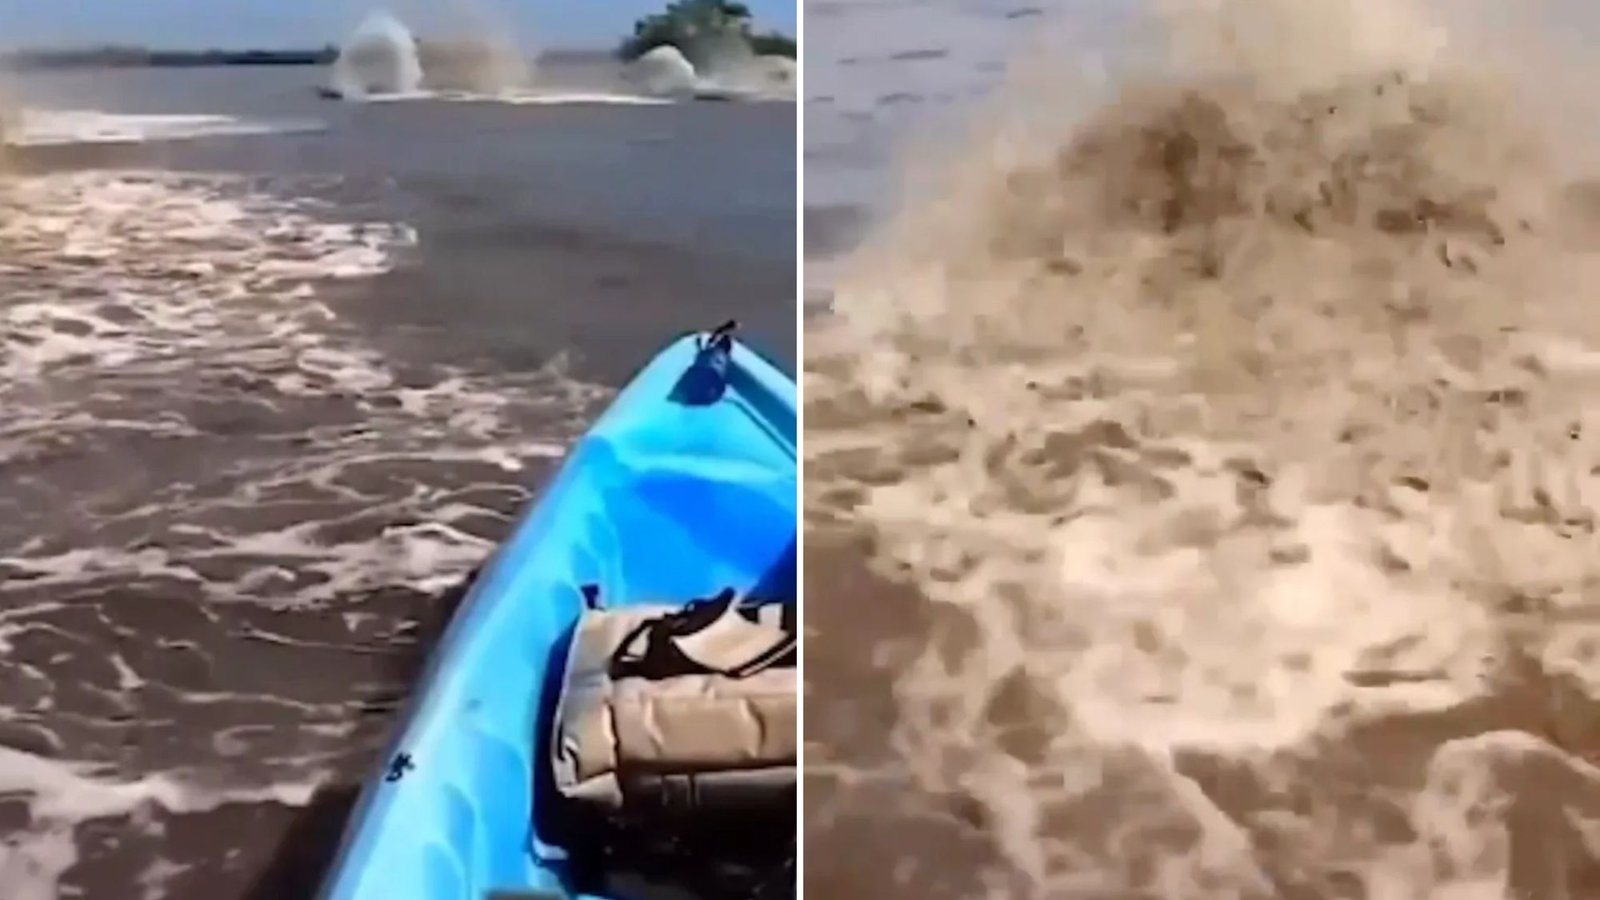 Shocking POV vid shows moment kayaker is nearly capsized by pack of mystery sea blobs that suddenly thrash in water